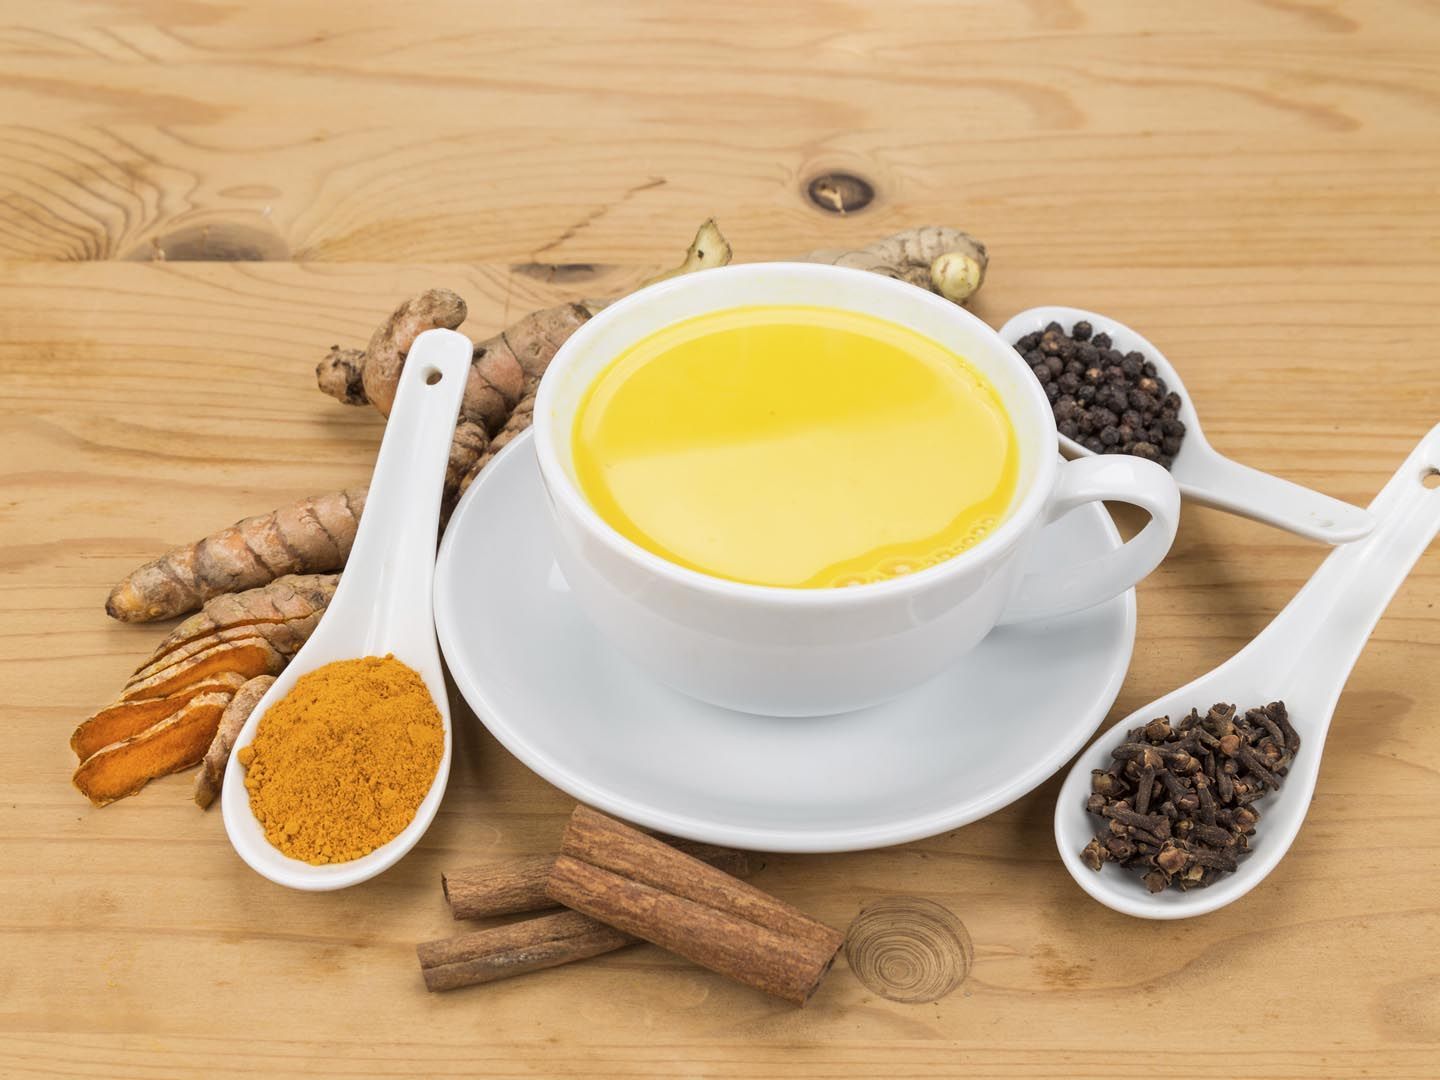 Learn how to make Dr. Weil's Golden Milk & find out about the health benefits of this delicious anti-inflammatory drink. Try Dr. Weil's Golden Milk recipe! -   22 anti inflammatory golden milk
 ideas